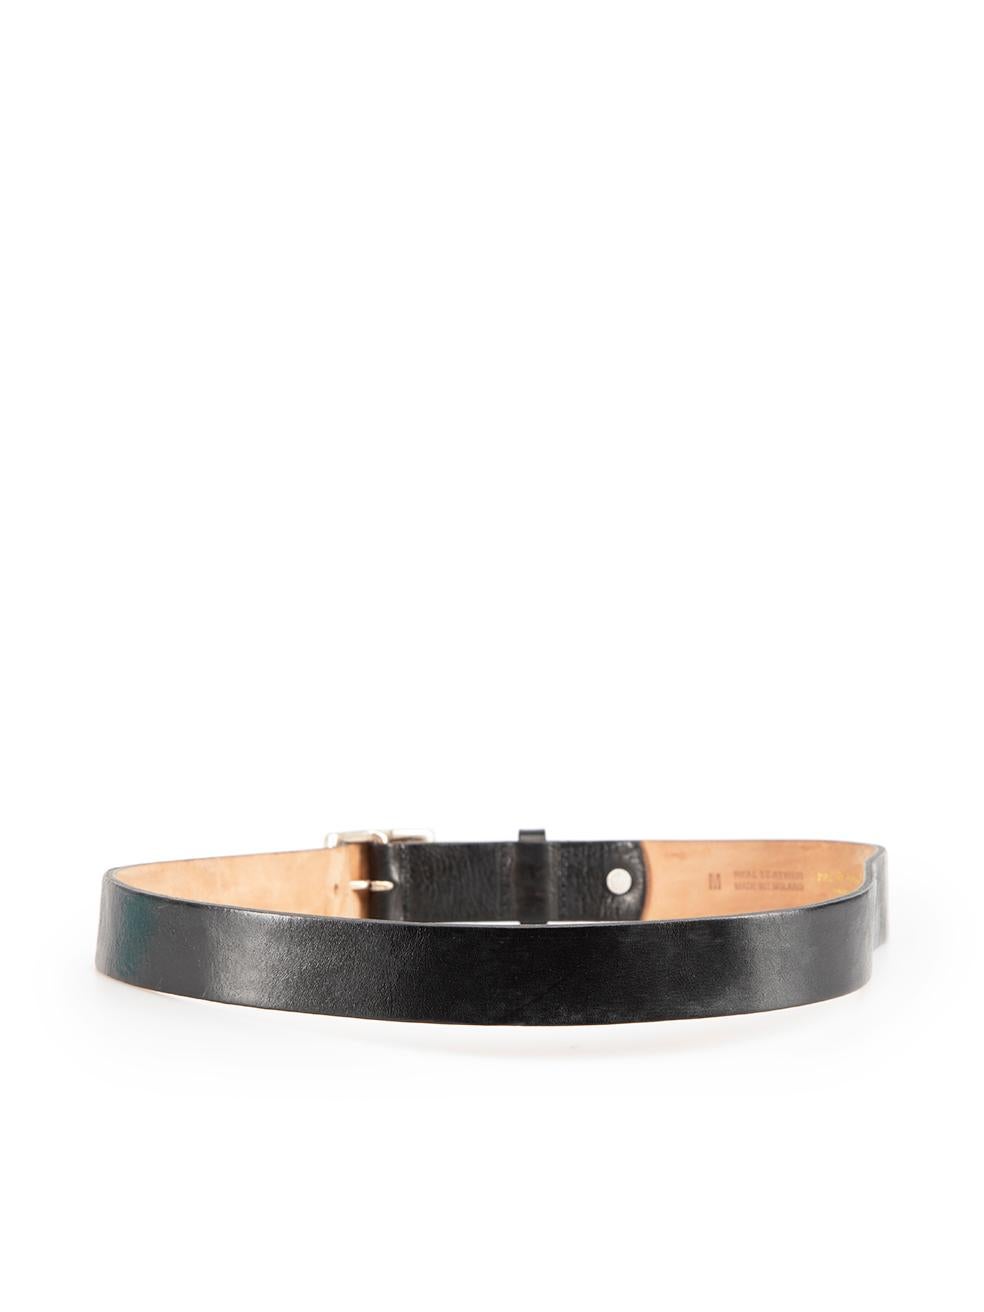 Rag & Bone Black Leather Buckle Belt In Excellent Condition For Sale In London, GB